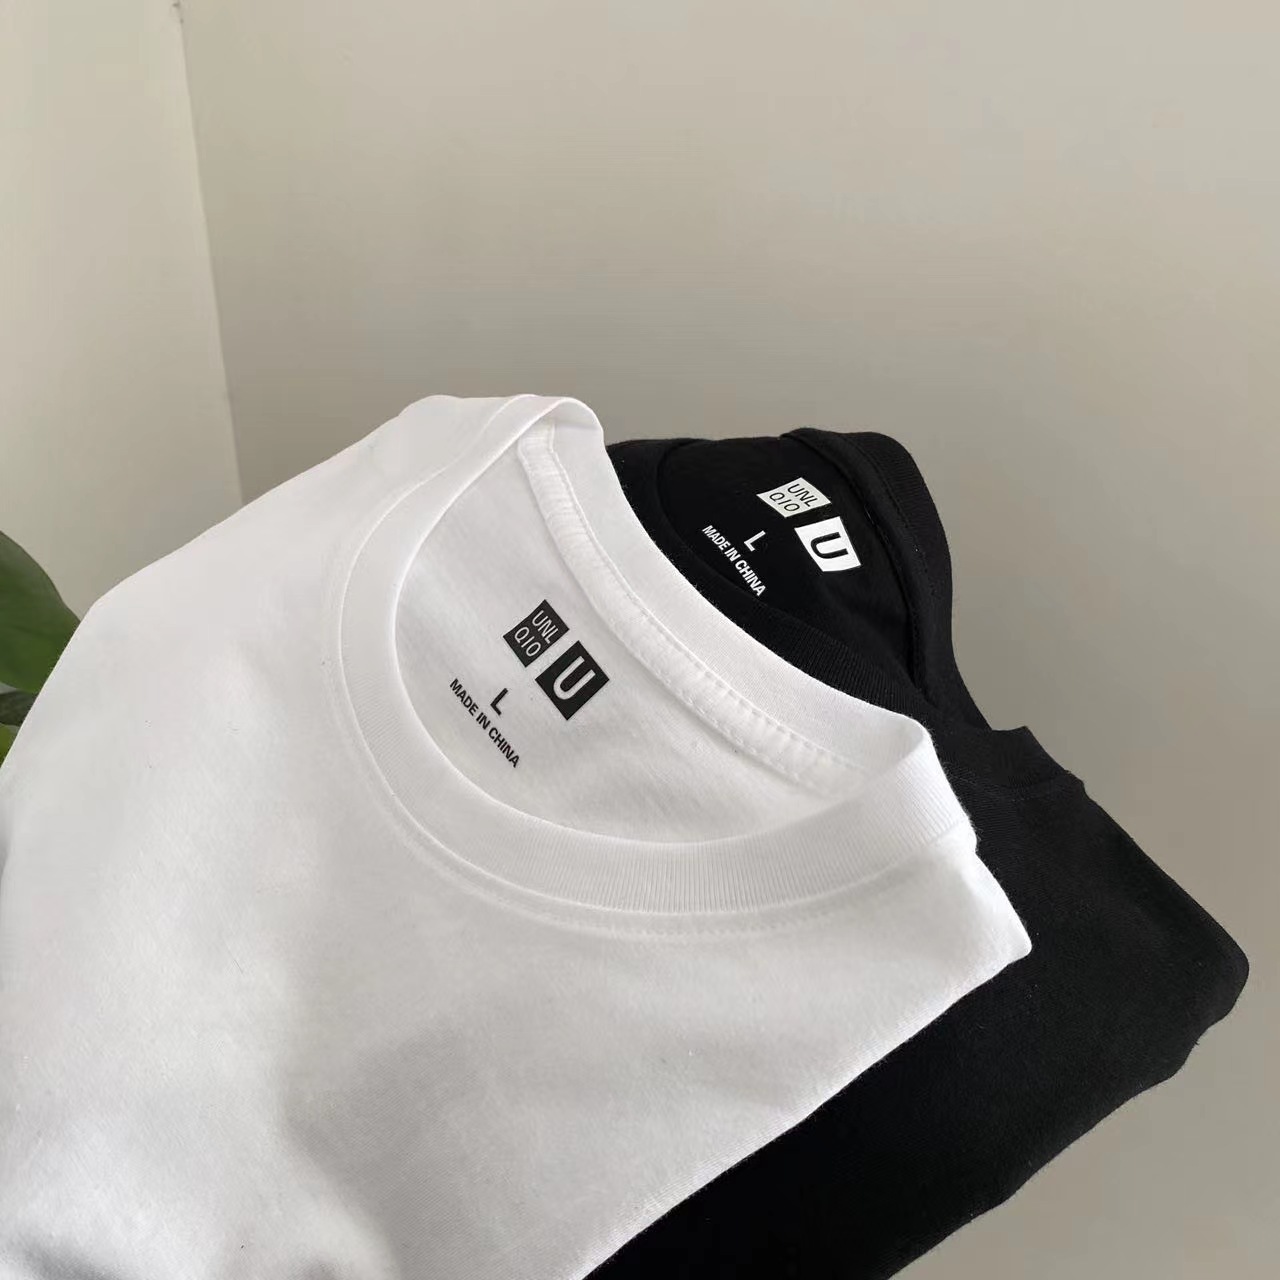 UJIA Short-Sleeved T-shirt Youjia All-Match Short-Sleeved round Neck Parent-Child Children's Clothing Men's and Women's Clothing Store Same Style Bottoming Shirt Fashion Women Clothes